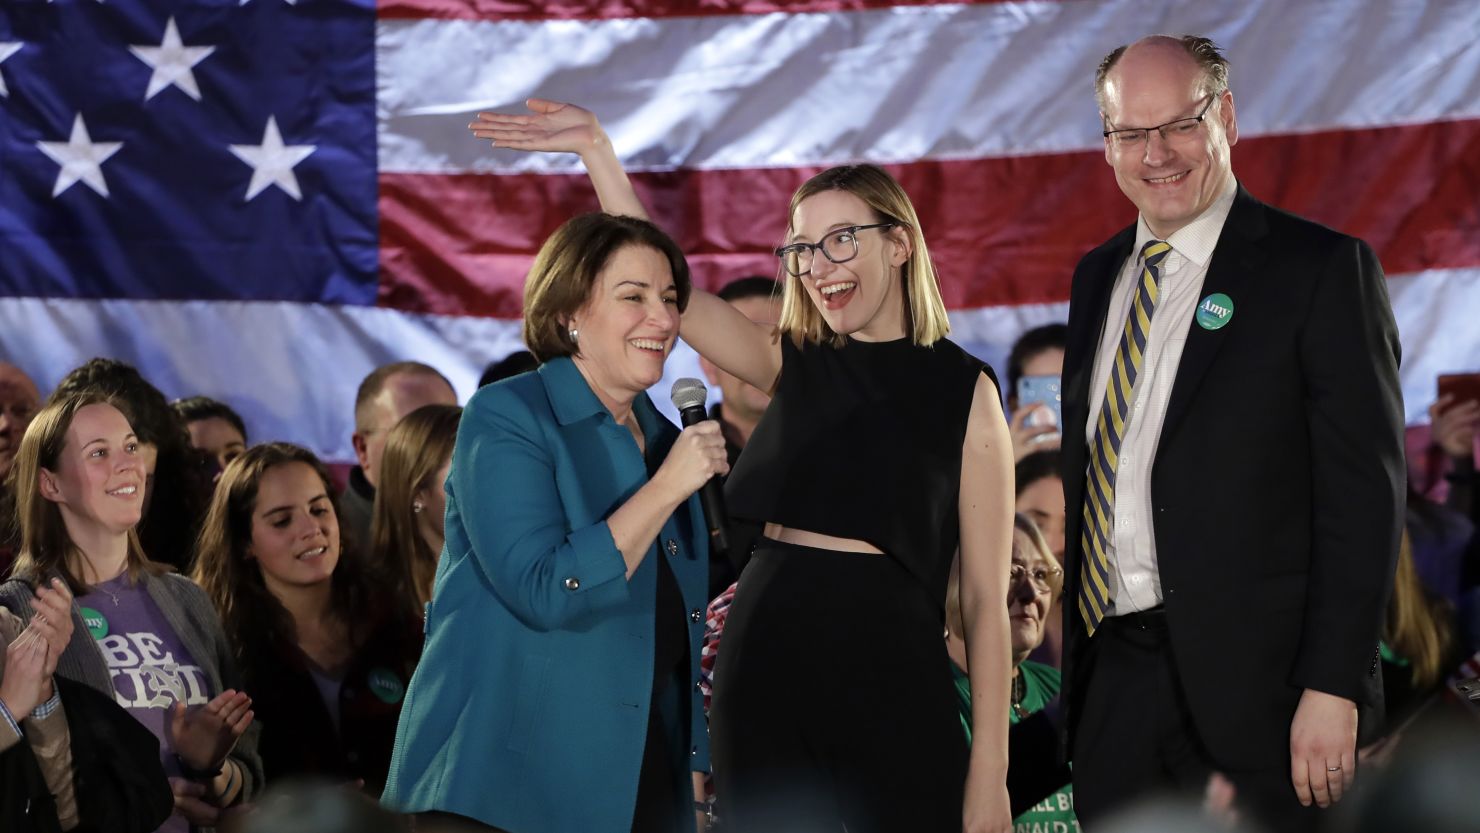 Sen. Amy Klobuchar, a Minnesota Democrat who was also then a presidential candidate, at left, introduces her daughter Abigail, center, and husband John Bessler during a rally at Franklin Junior High School in Des Moines, Iowa, in February.